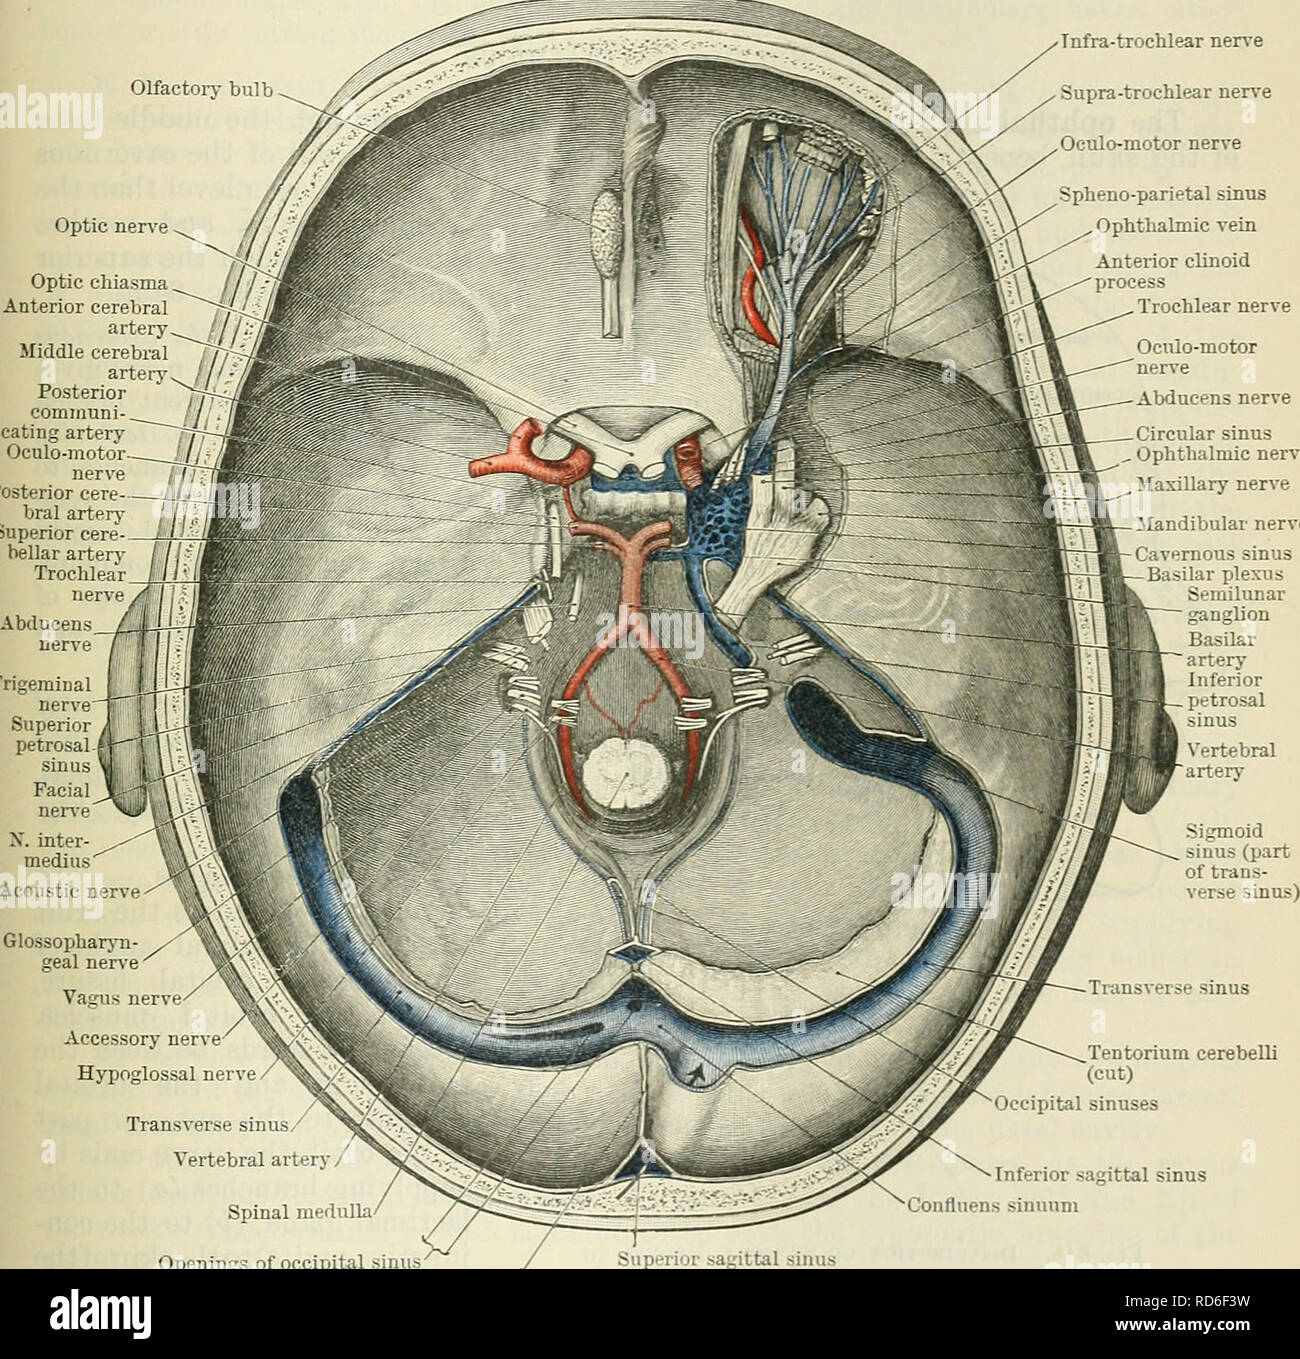 . Cunningham's Text-book of anatomy. Anatomy. TEOCHLEAE NEKVE. 771 motor nerve and the ophthalmic division of the trigeminal nerve. It enters the orbit above the muscles of the eyeball, and terminates in the orbital (superior) surface of the superior oblique muscle. Communications.—In the cavernous sinus the nerve receives (1) a communicating Olfactory bulb. Optic nerve Optic chiasma Anterior cerebral artery Middle cerebra artery Posterior communi- cating artery Oculo-motor nerve Posterior cere- bral artery Superior cere- bellar artery Trochlear nerve Abducens nerve Trigemina nerve&quot;-!&quo Stock Photo